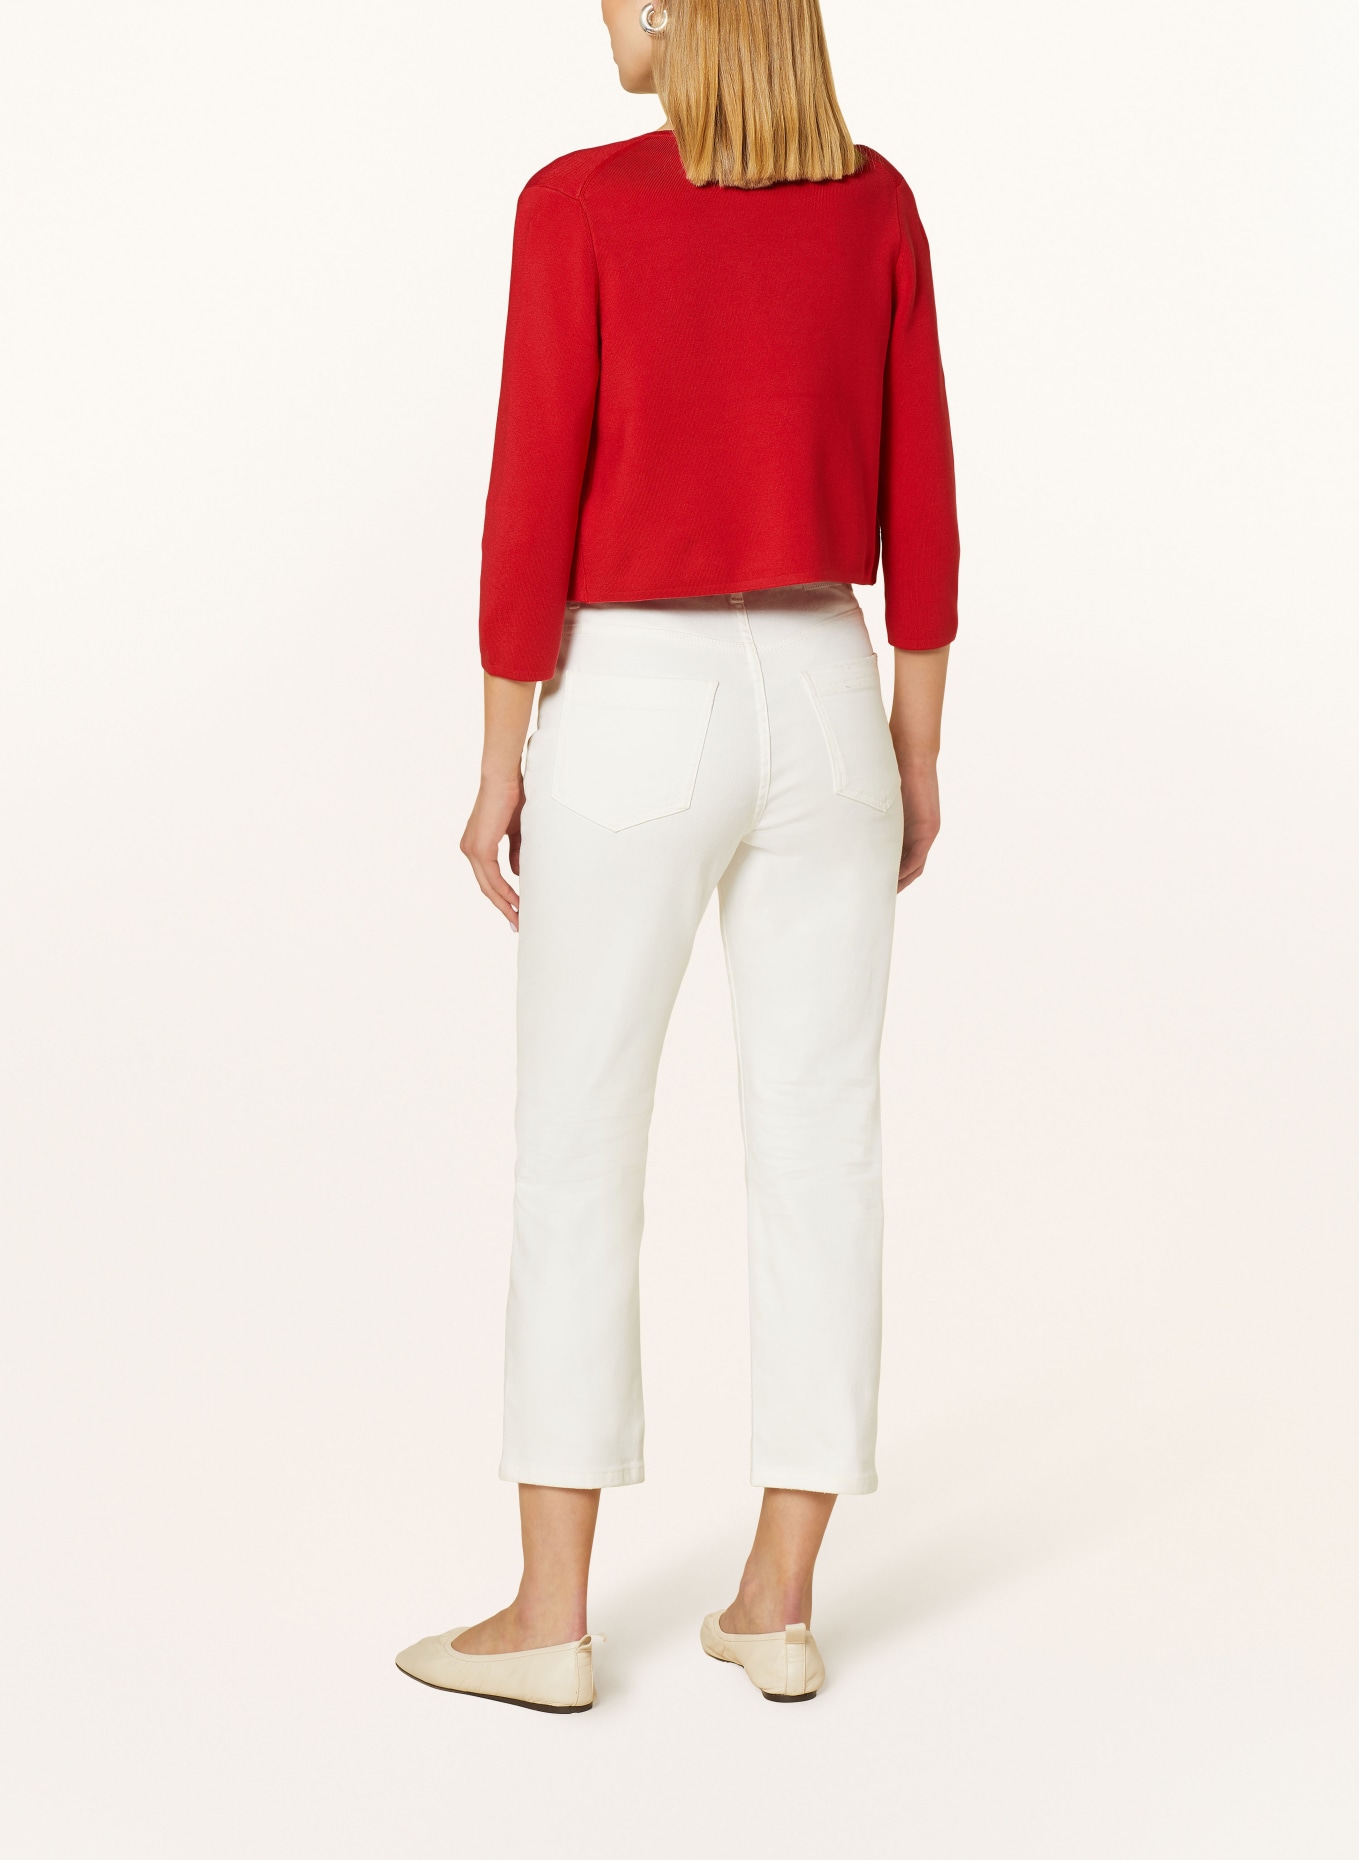 HOBBS Knit bolero ELLA with 3/4 sleeves, Color: RED (Image 3)